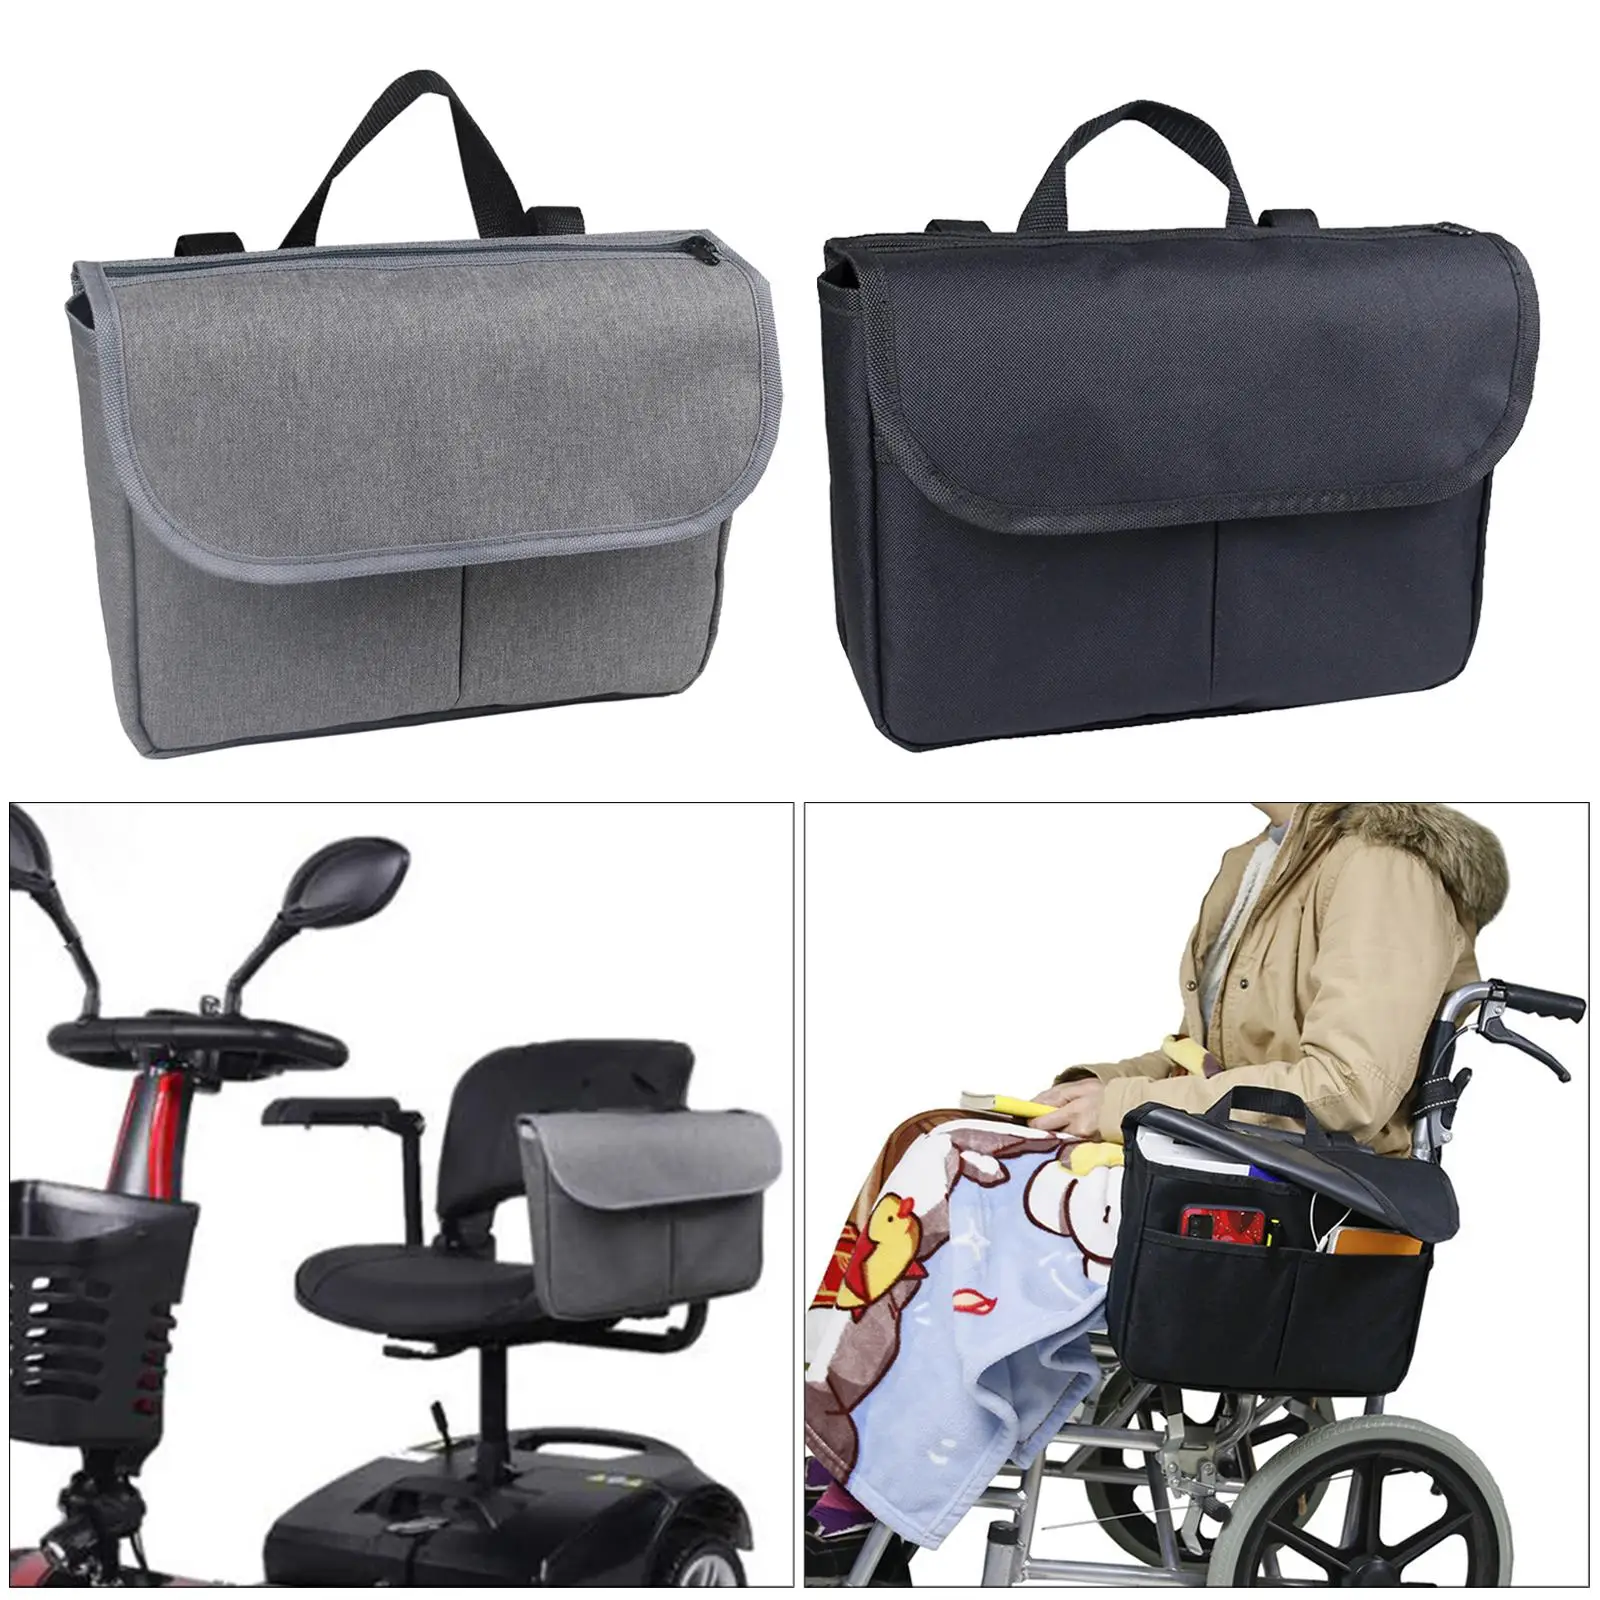 Wheelchair Side Bag Armrest Pouch Organizer Bag Phone Pocket for Electric, Manual or Powered Chairs